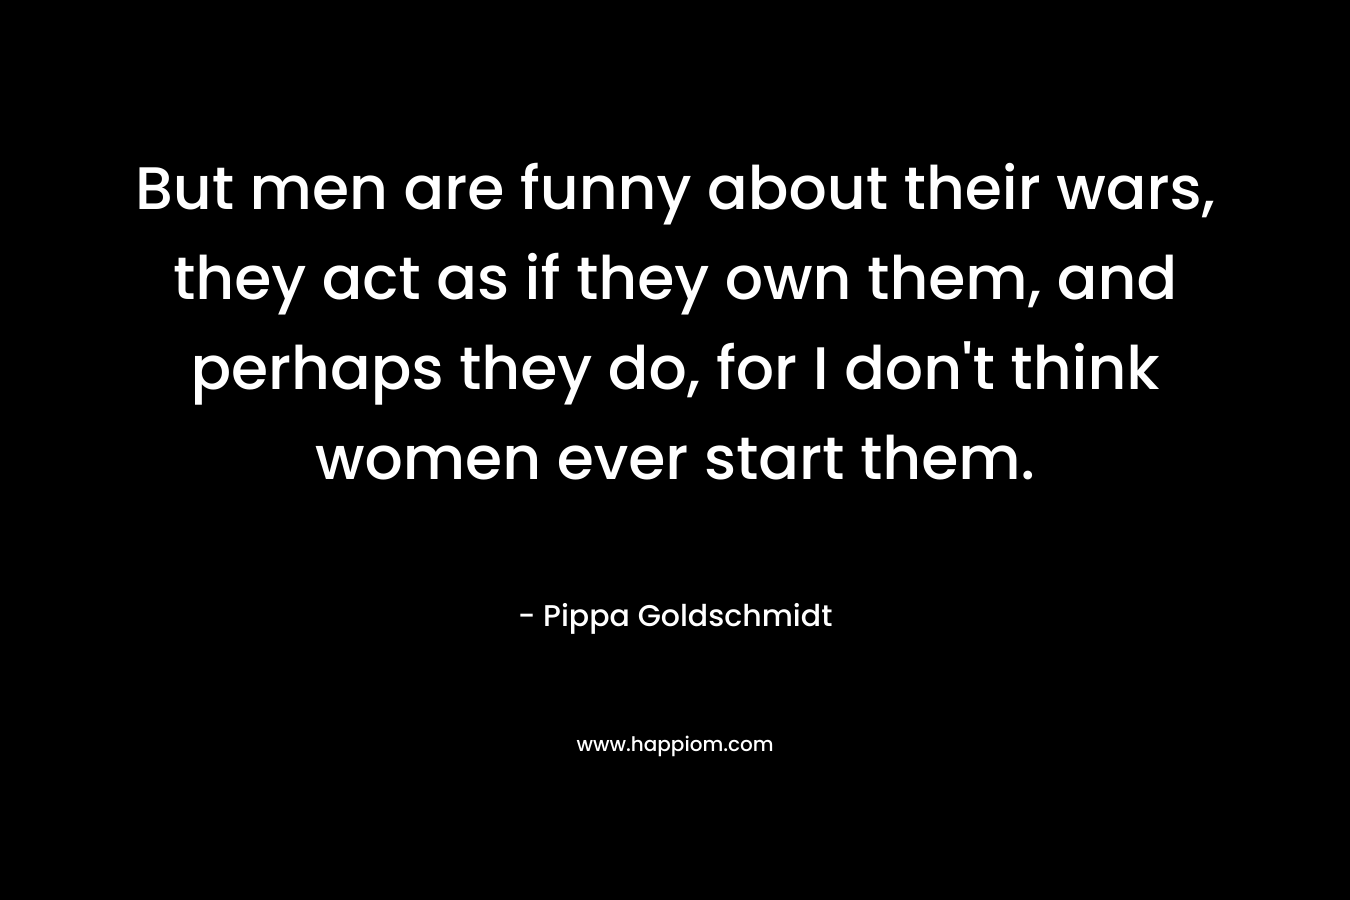 But men are funny about their wars, they act as if they own them, and perhaps they do, for I don't think women ever start them.